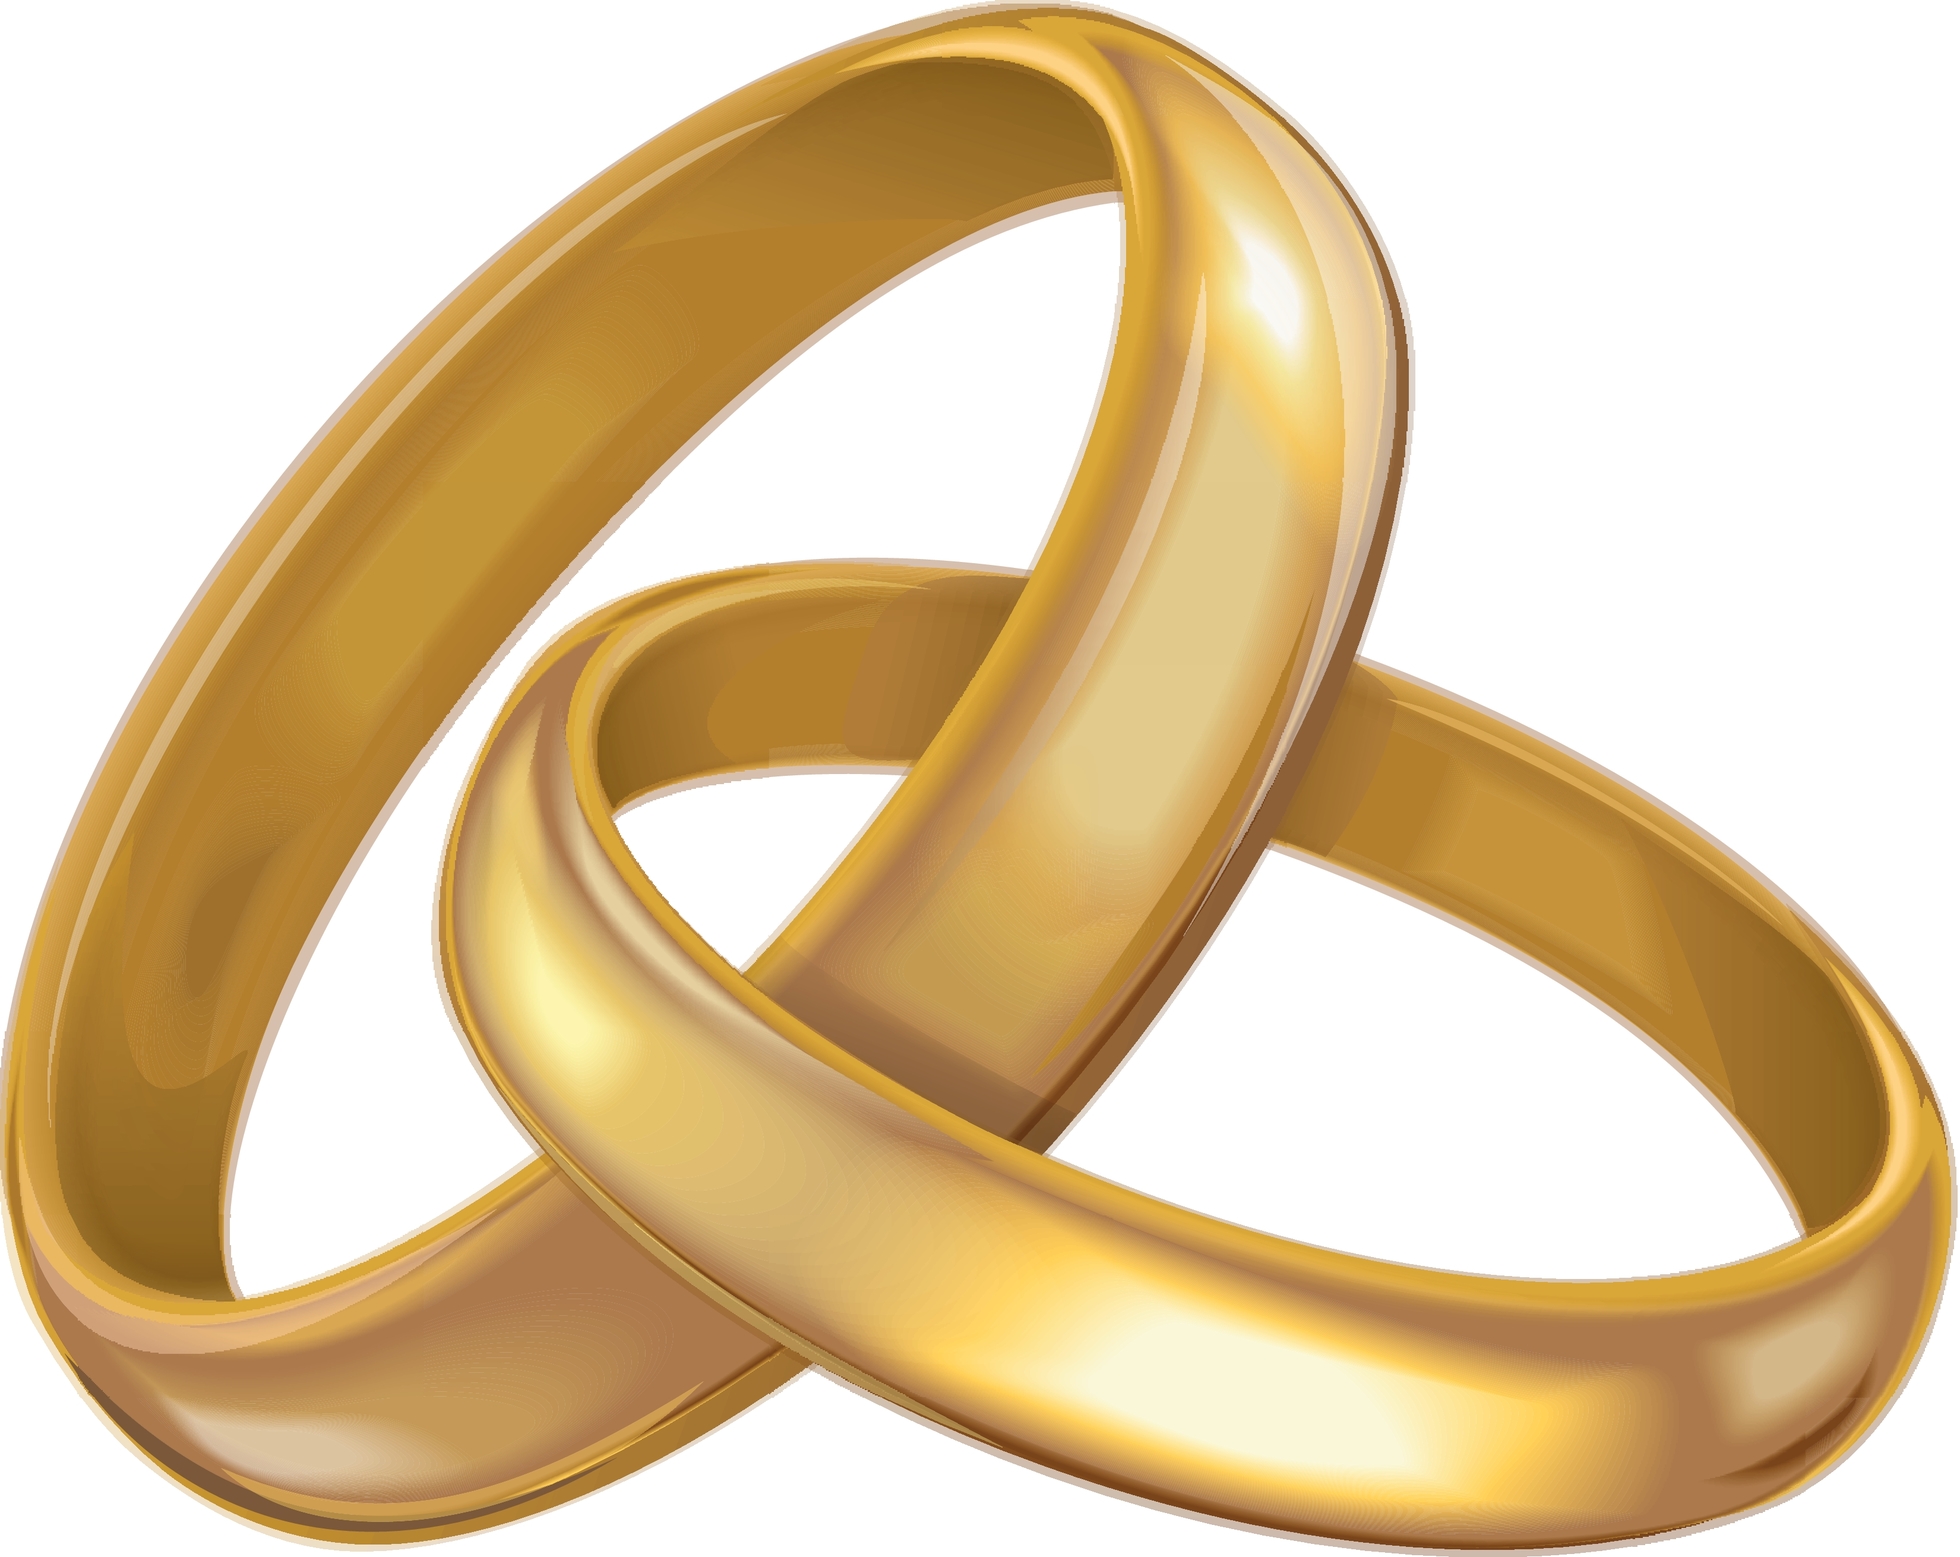 linked wedding rings clipart